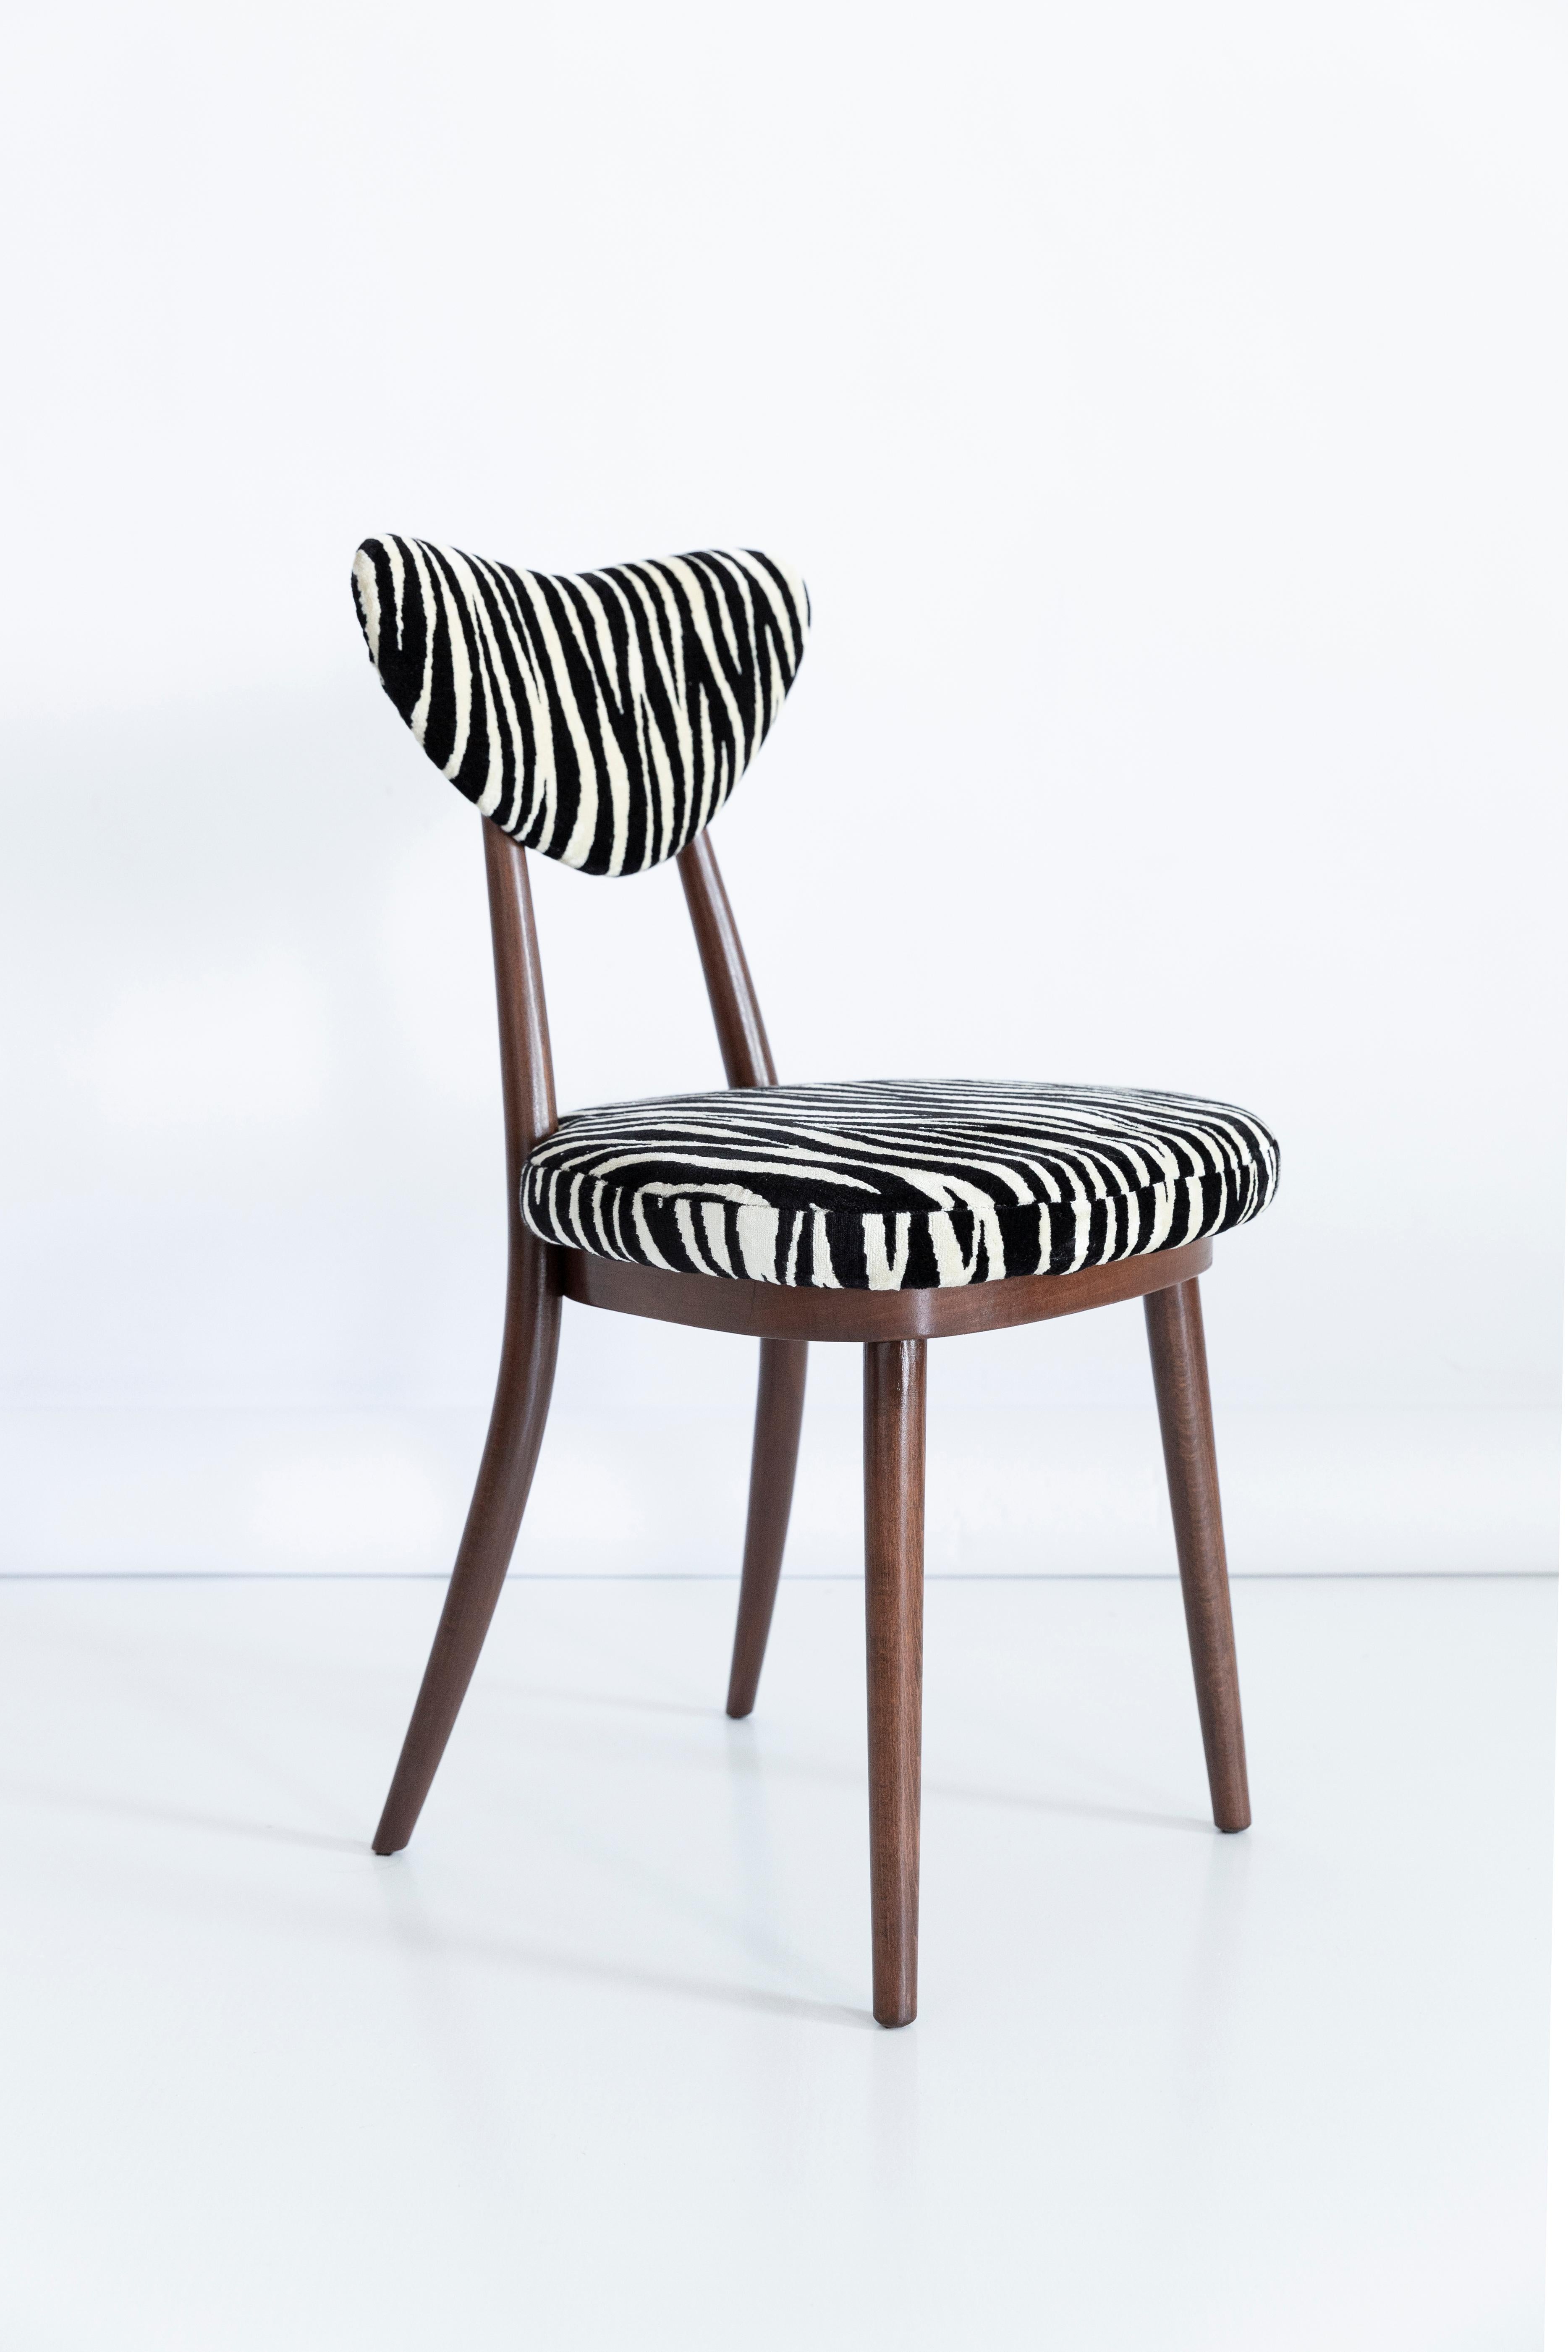 Set of Four Midcentury Zebra Black and White Heart Chairs, Poland, 1960s For Sale 1